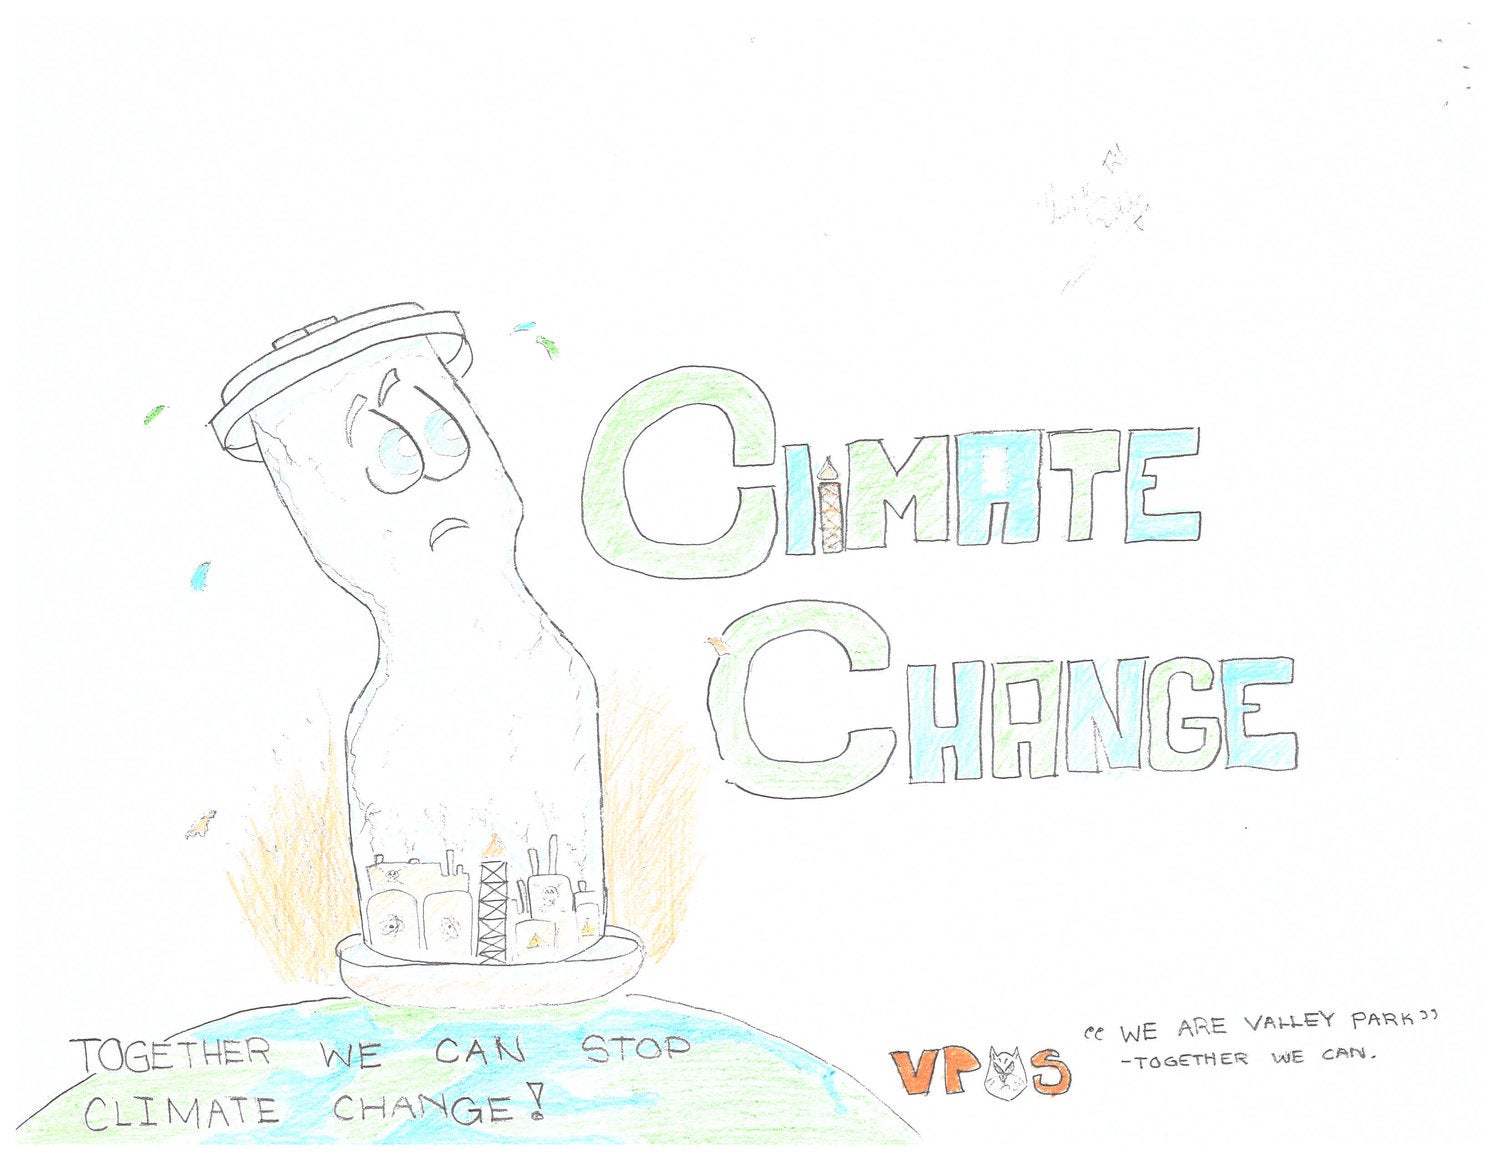 Climate change and you submission